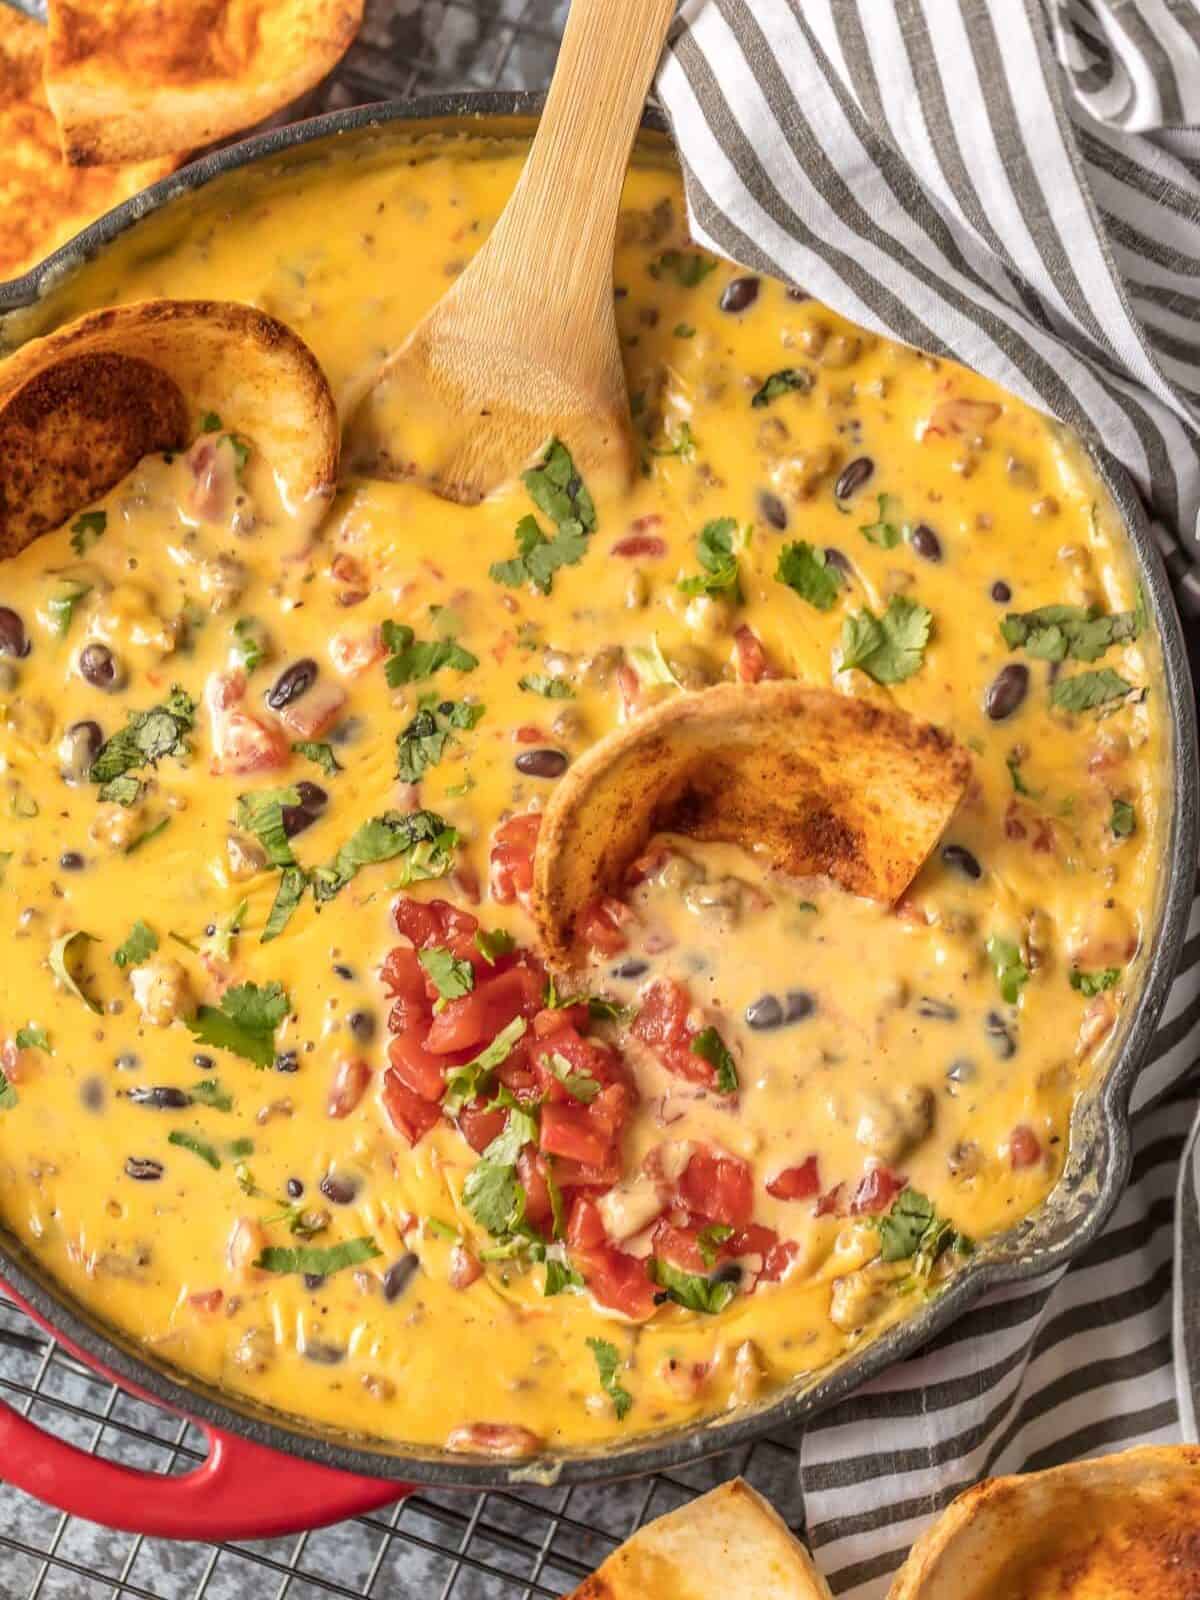 Velveeta Queso recipe with rotel, sausage, beans, and more